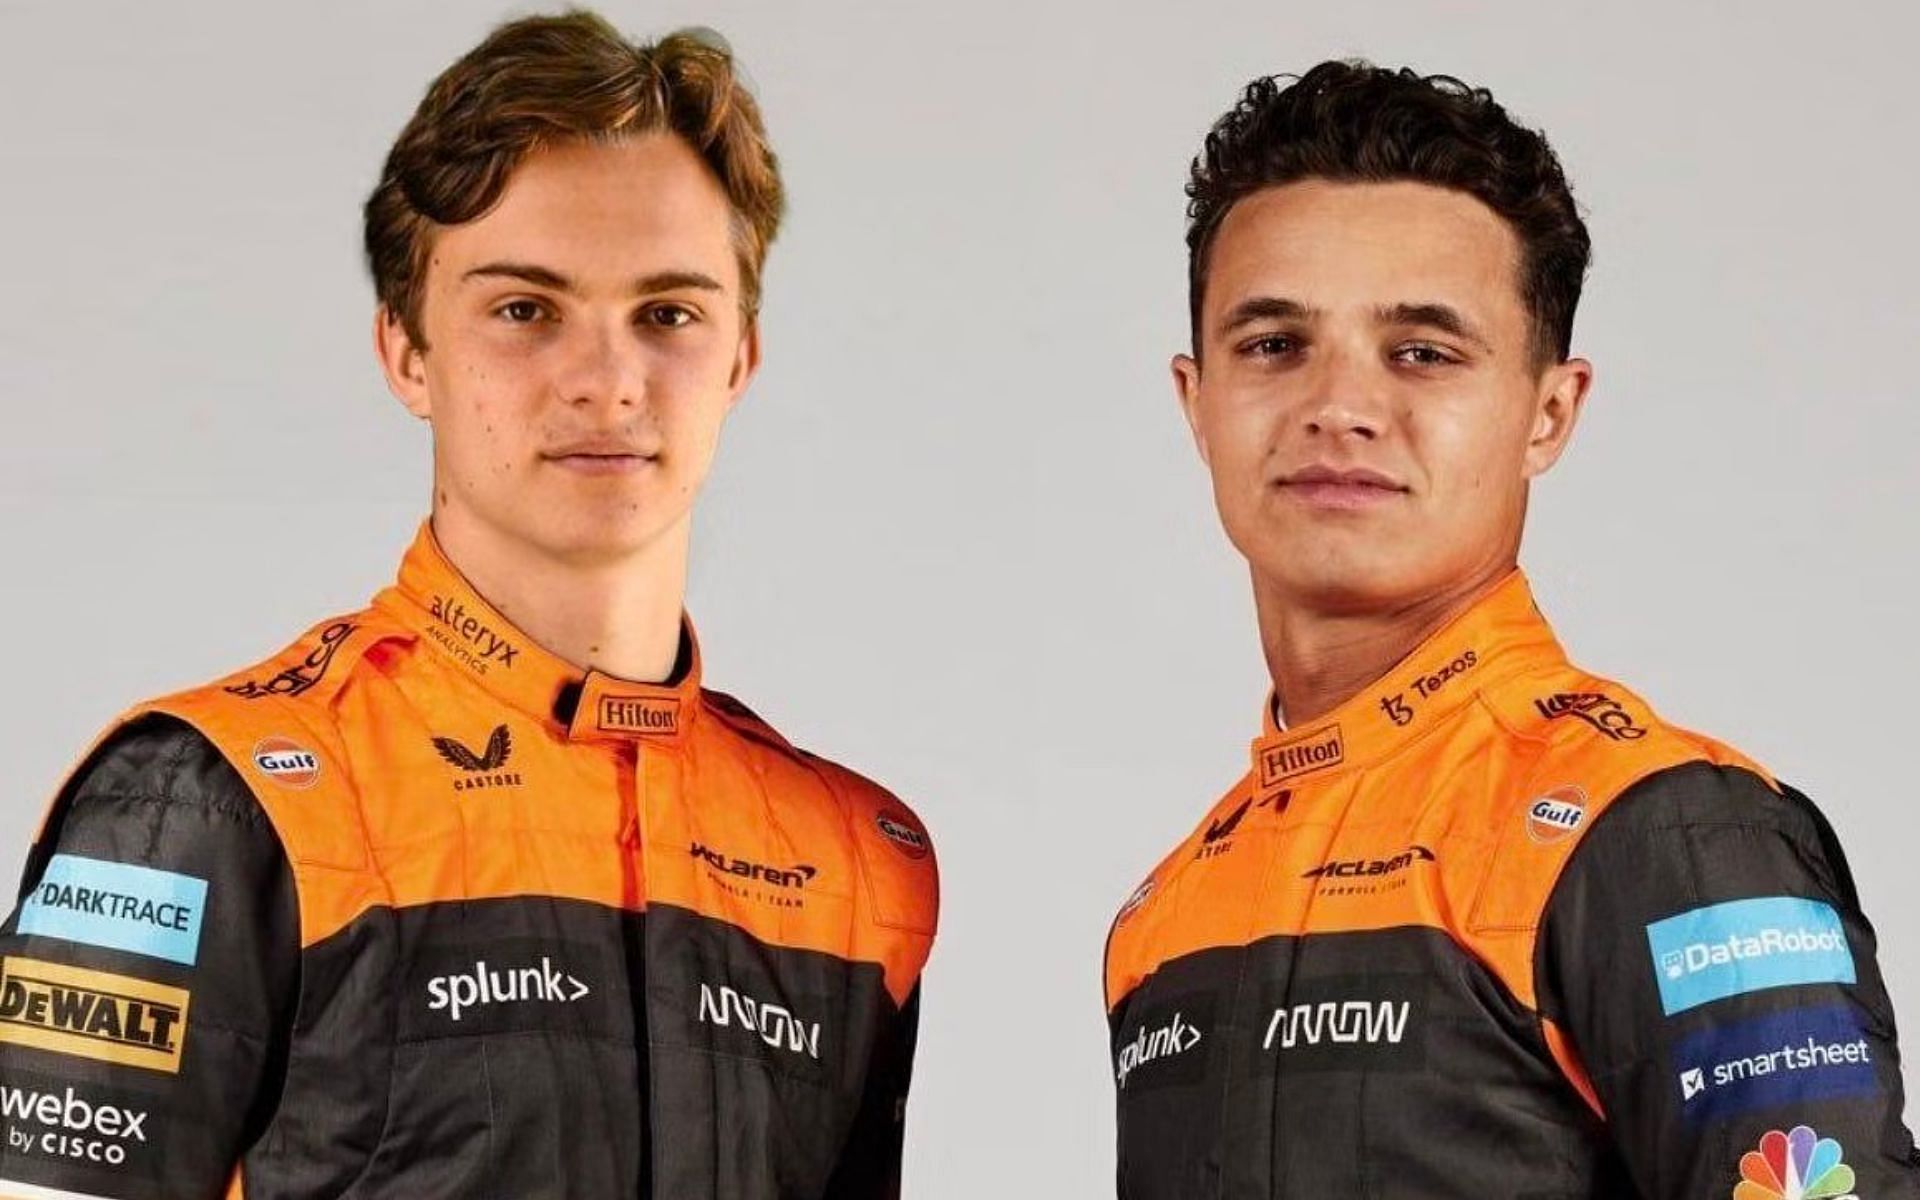 Oscar Piastri (left), imagined in McLaren colors, with Lando Norris (right) (Image source: Twitter/@Jacob07070483)